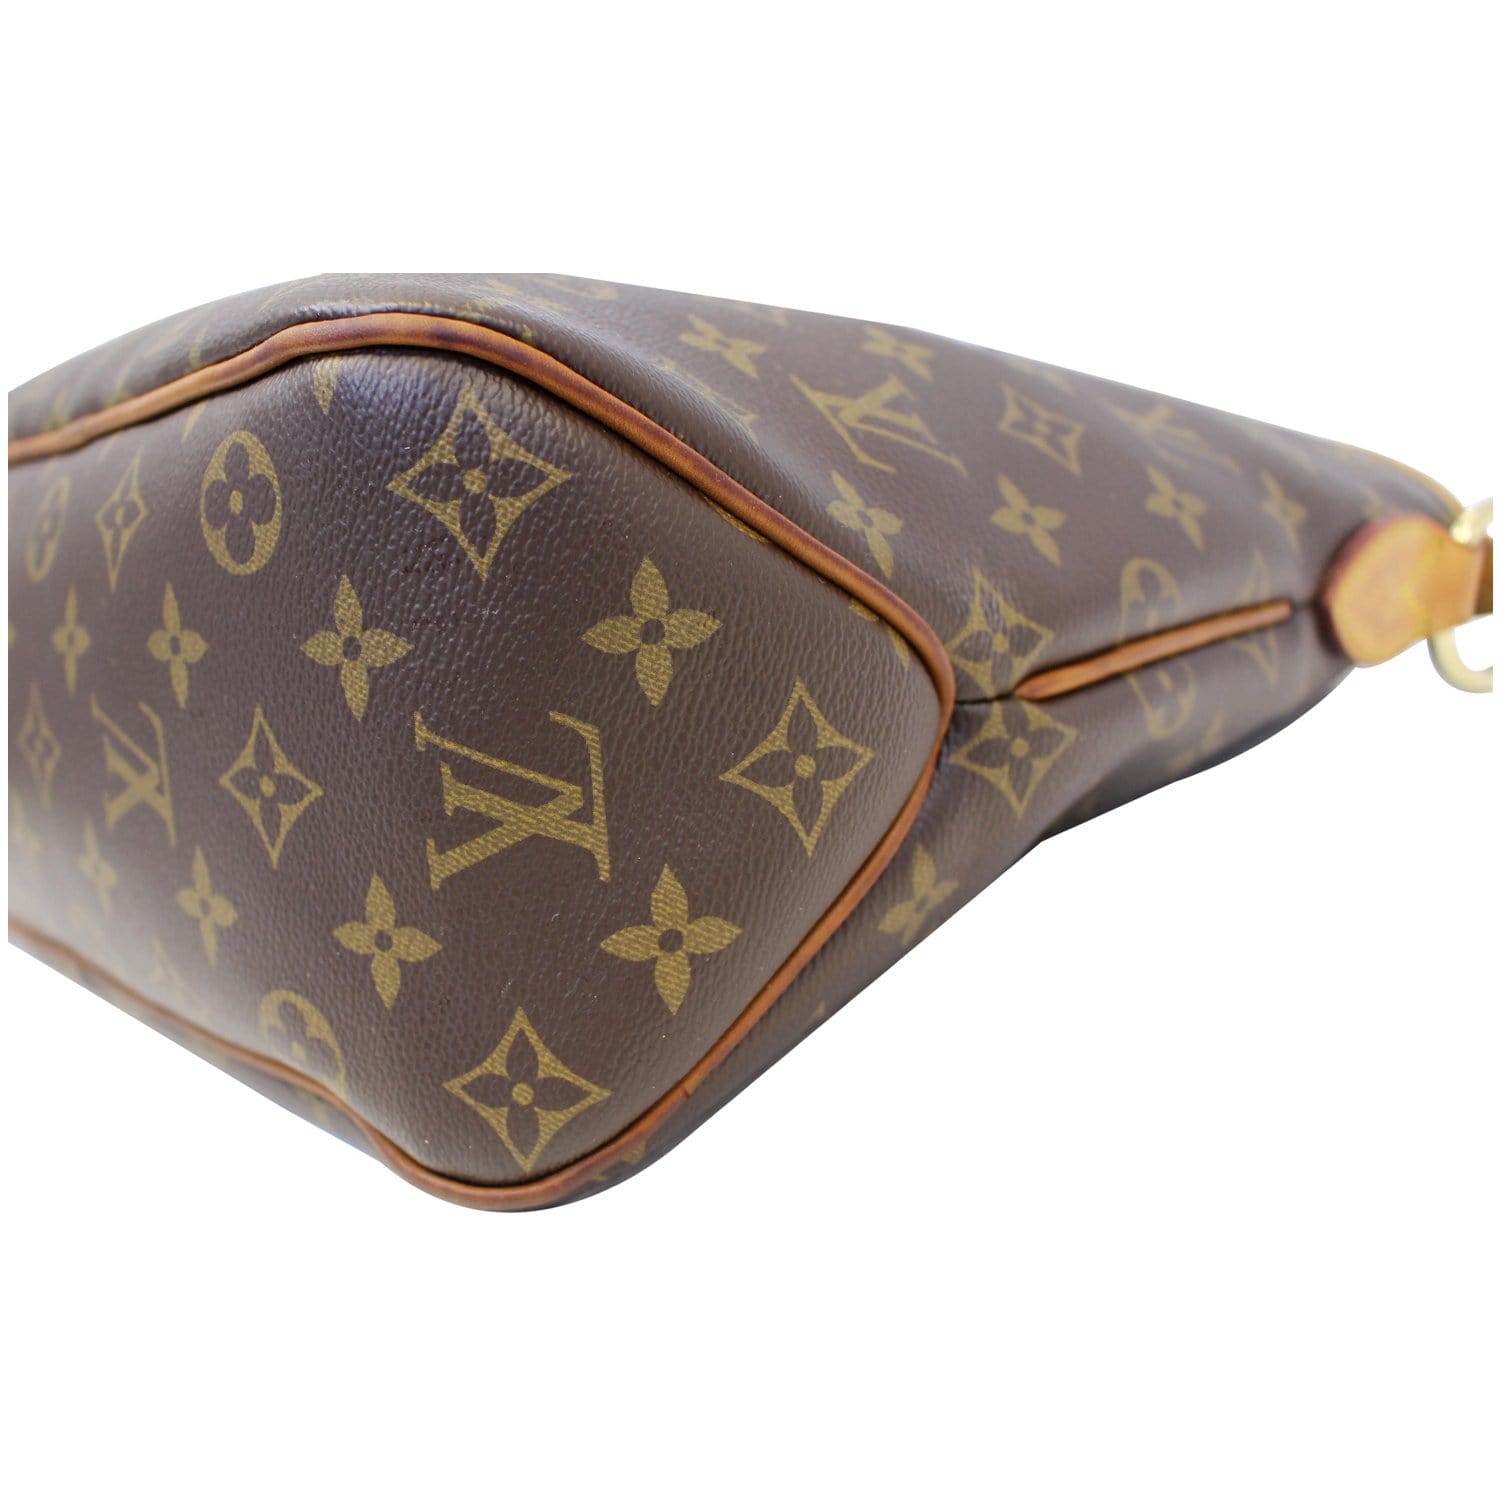 Authentic Louis Vuitton Monogram Canvas Delightful PM Shoulder Bag for Sale  in Cold Spring Harbor, NY - OfferUp